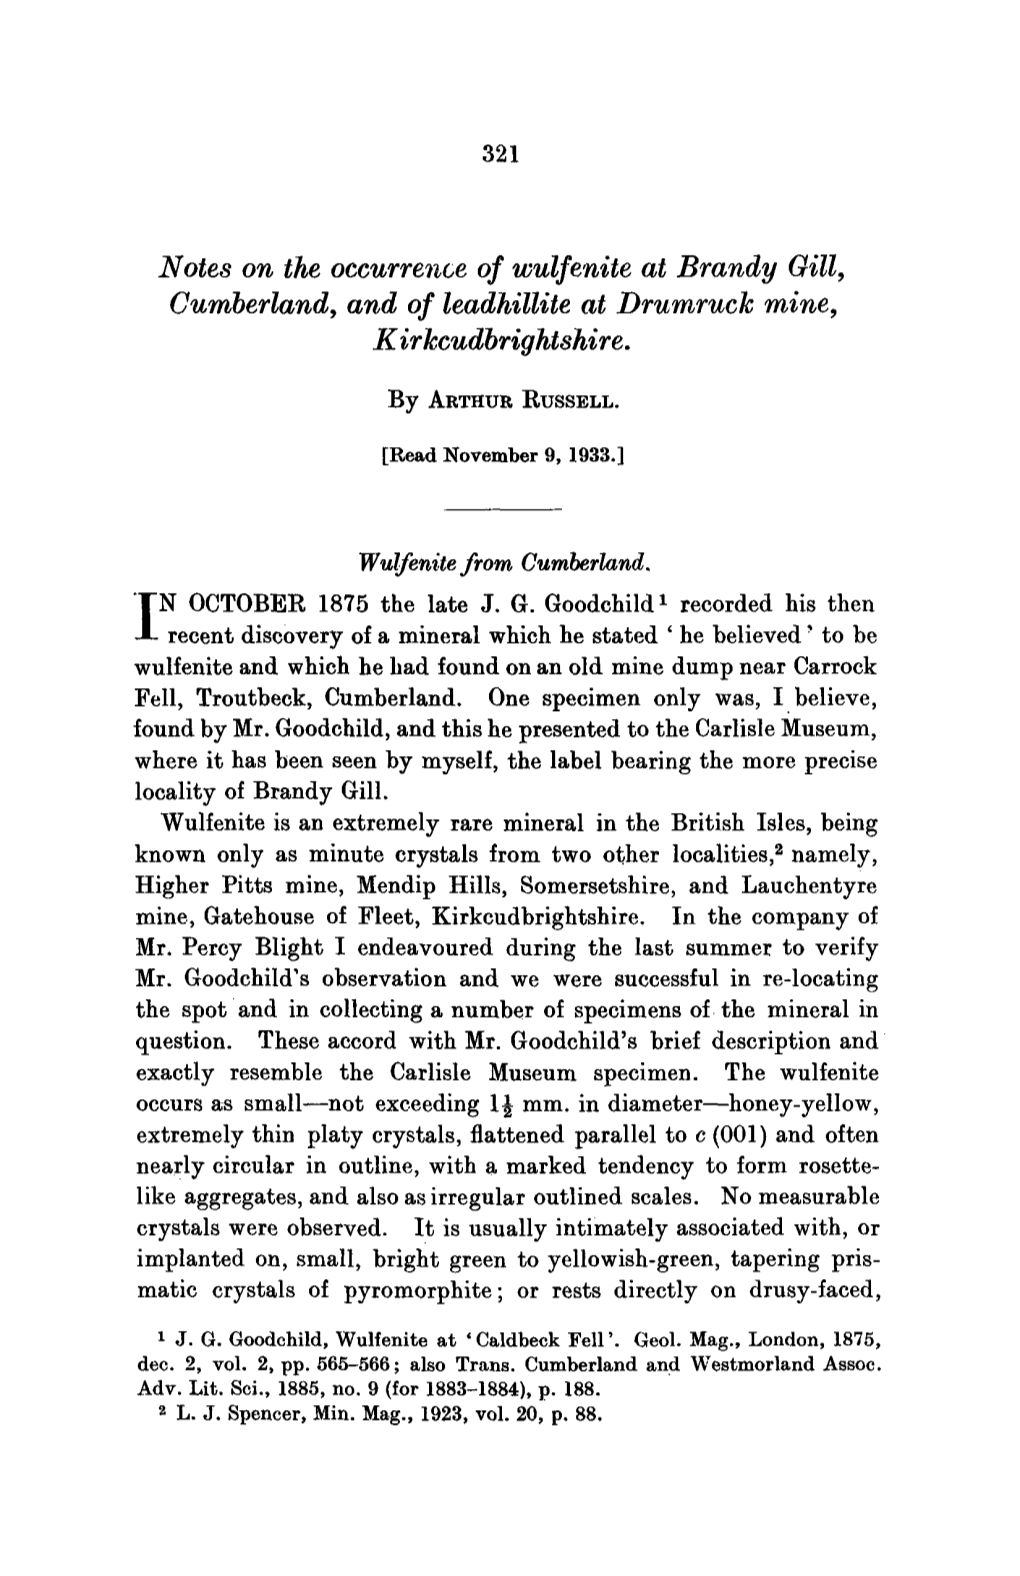 Notes on the Occurrence of Wulfenite at Brandy Gill, Cumberland, and of Leadhillite at Drumruck Mine, K Irkcudbrightshire